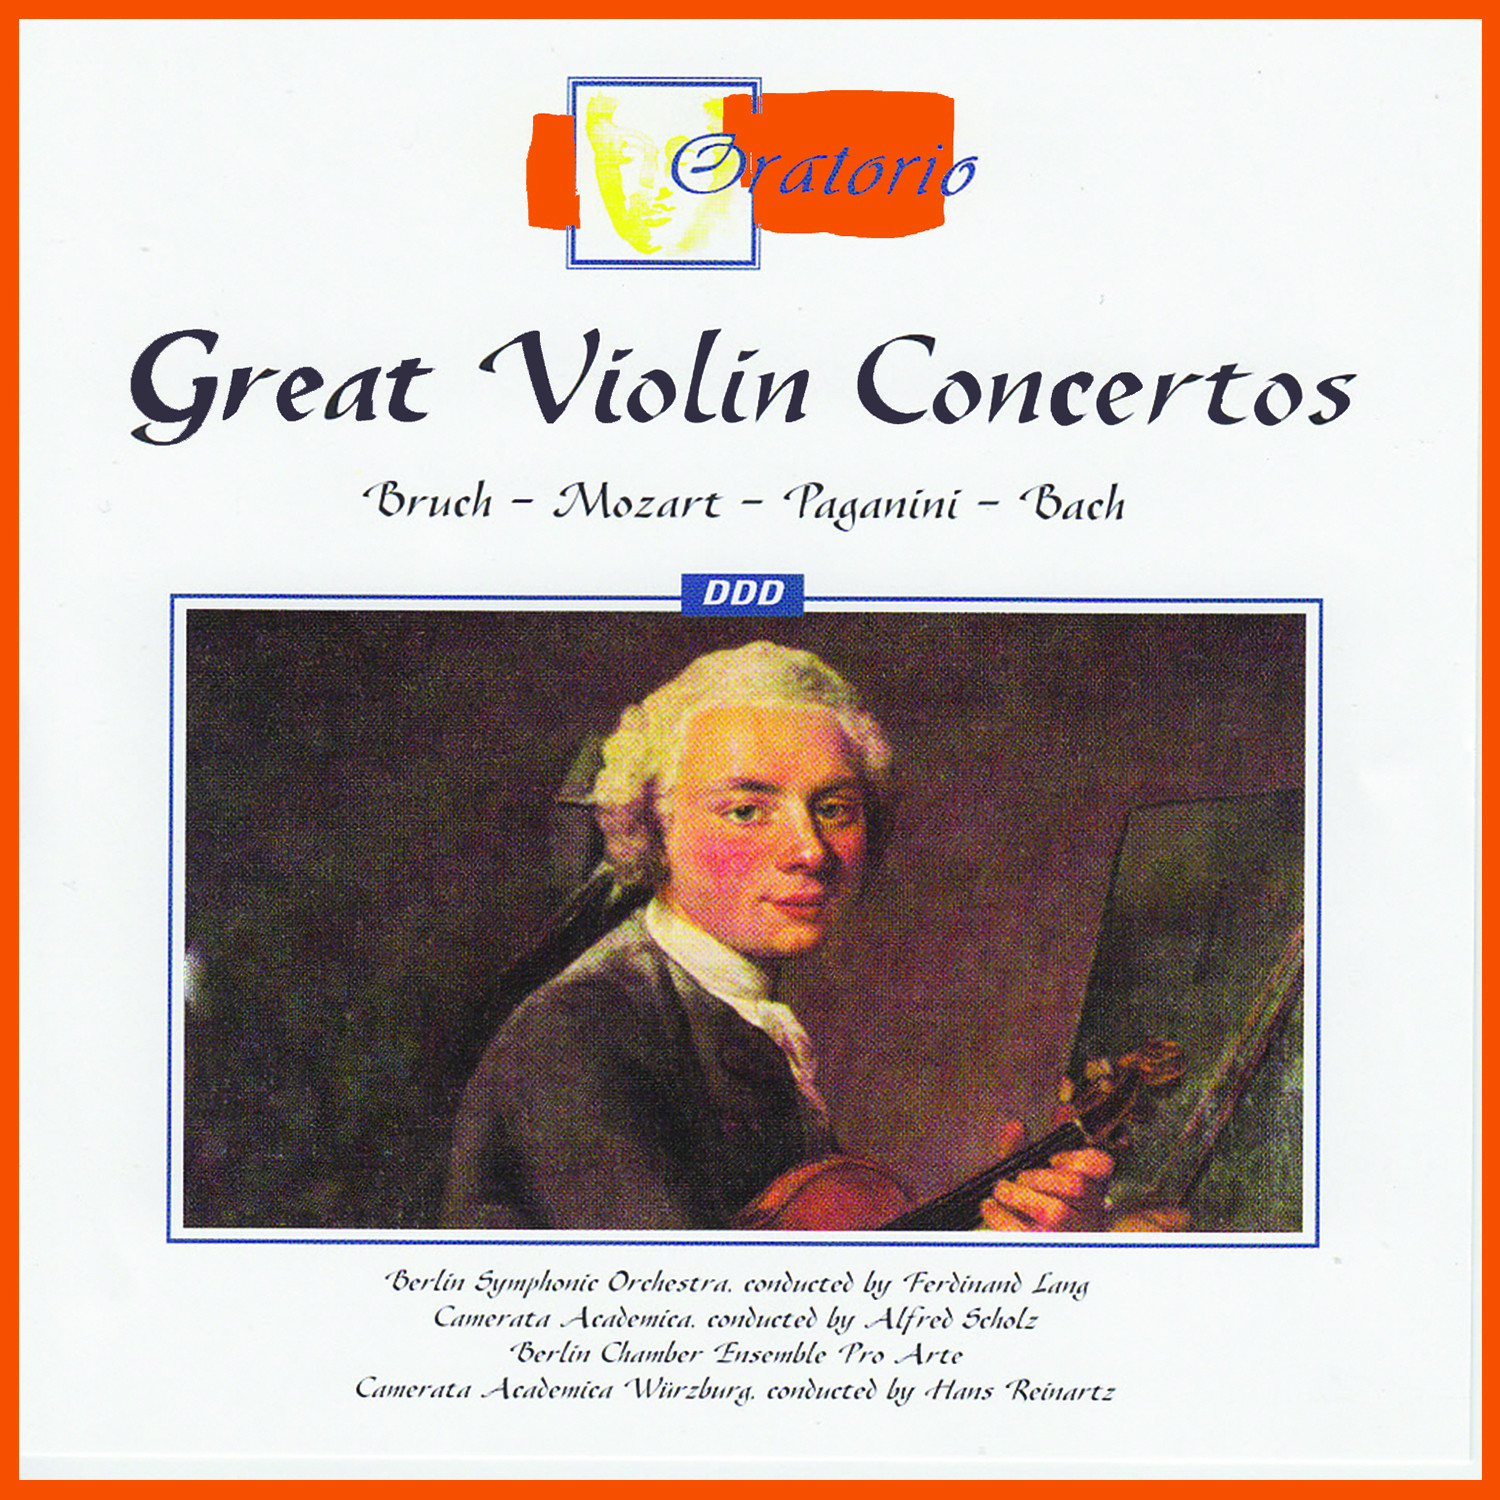 Concerto for Two Violins, Strings and Continuo in D Minor, BWV 1043: Largo ma non tanto